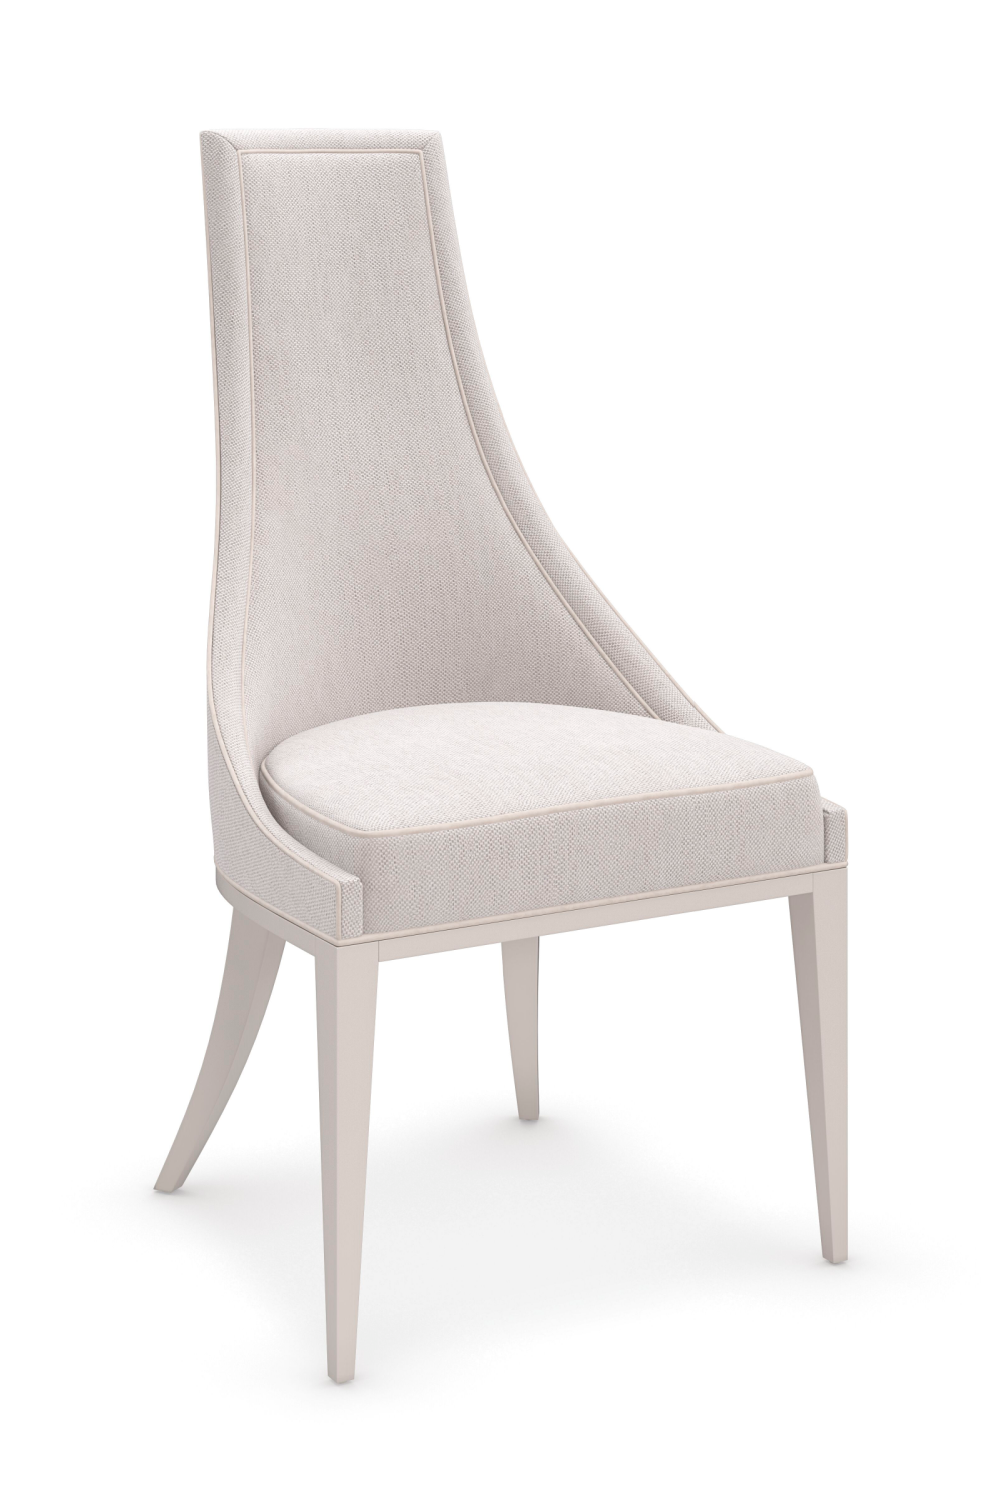 Off White Tapering Side Chair | Caracole Tall Order | Oroa.com